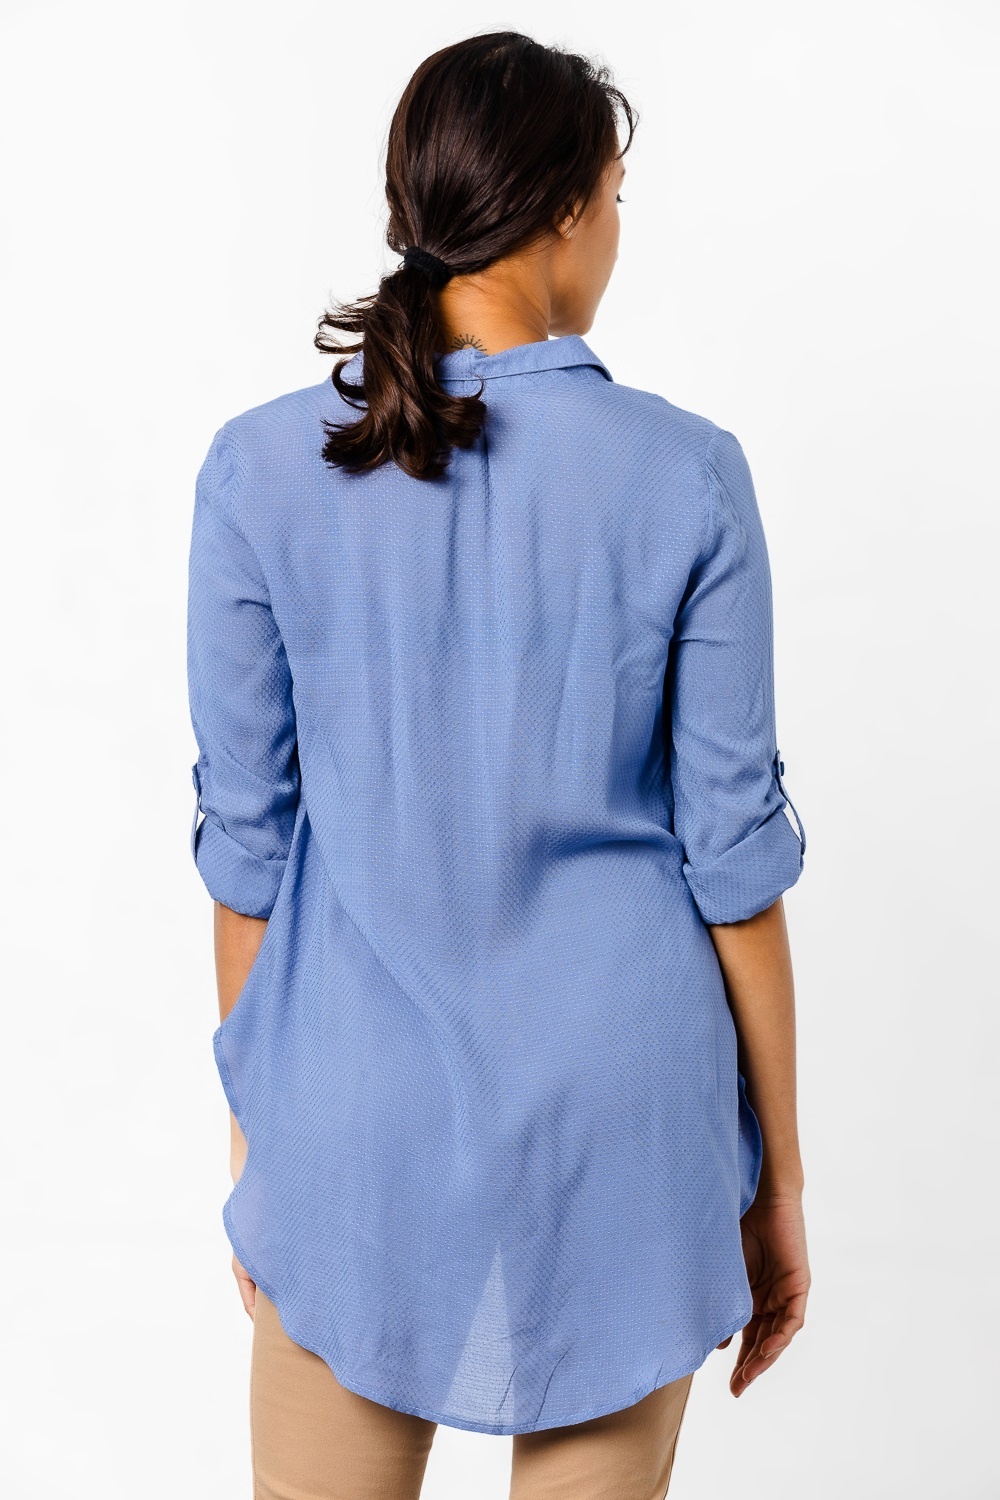 Odel Blue Tunic Top